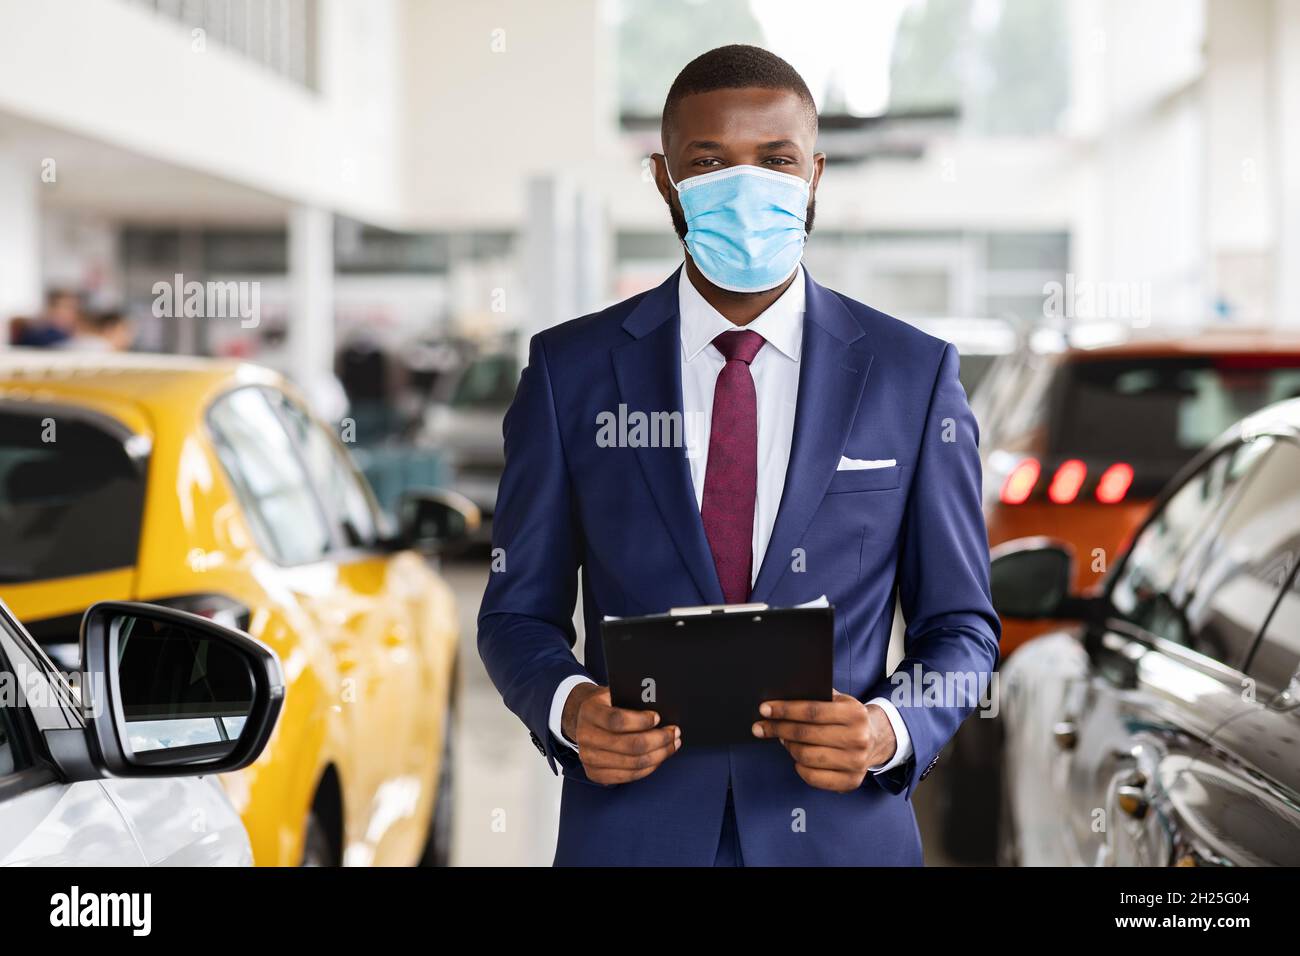 Young Black Car Salesman Wearing Medical Mask Posing At Workplace In Showroom Stock Photo